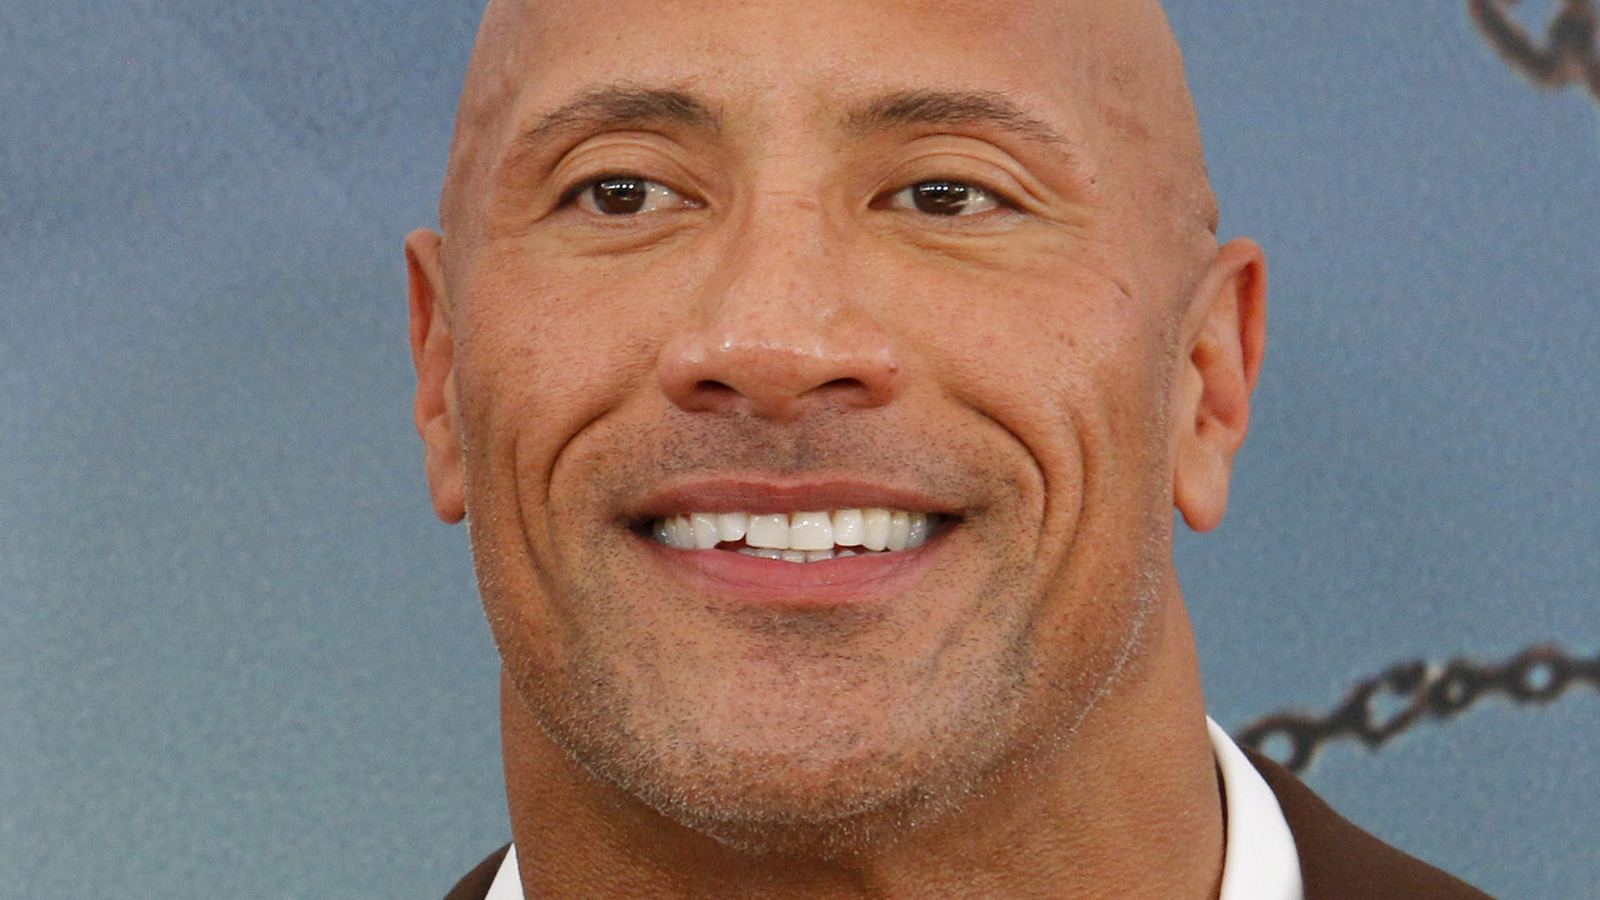 How Tall Is Dwayne Johnson? The Rock's Height Towers Over His